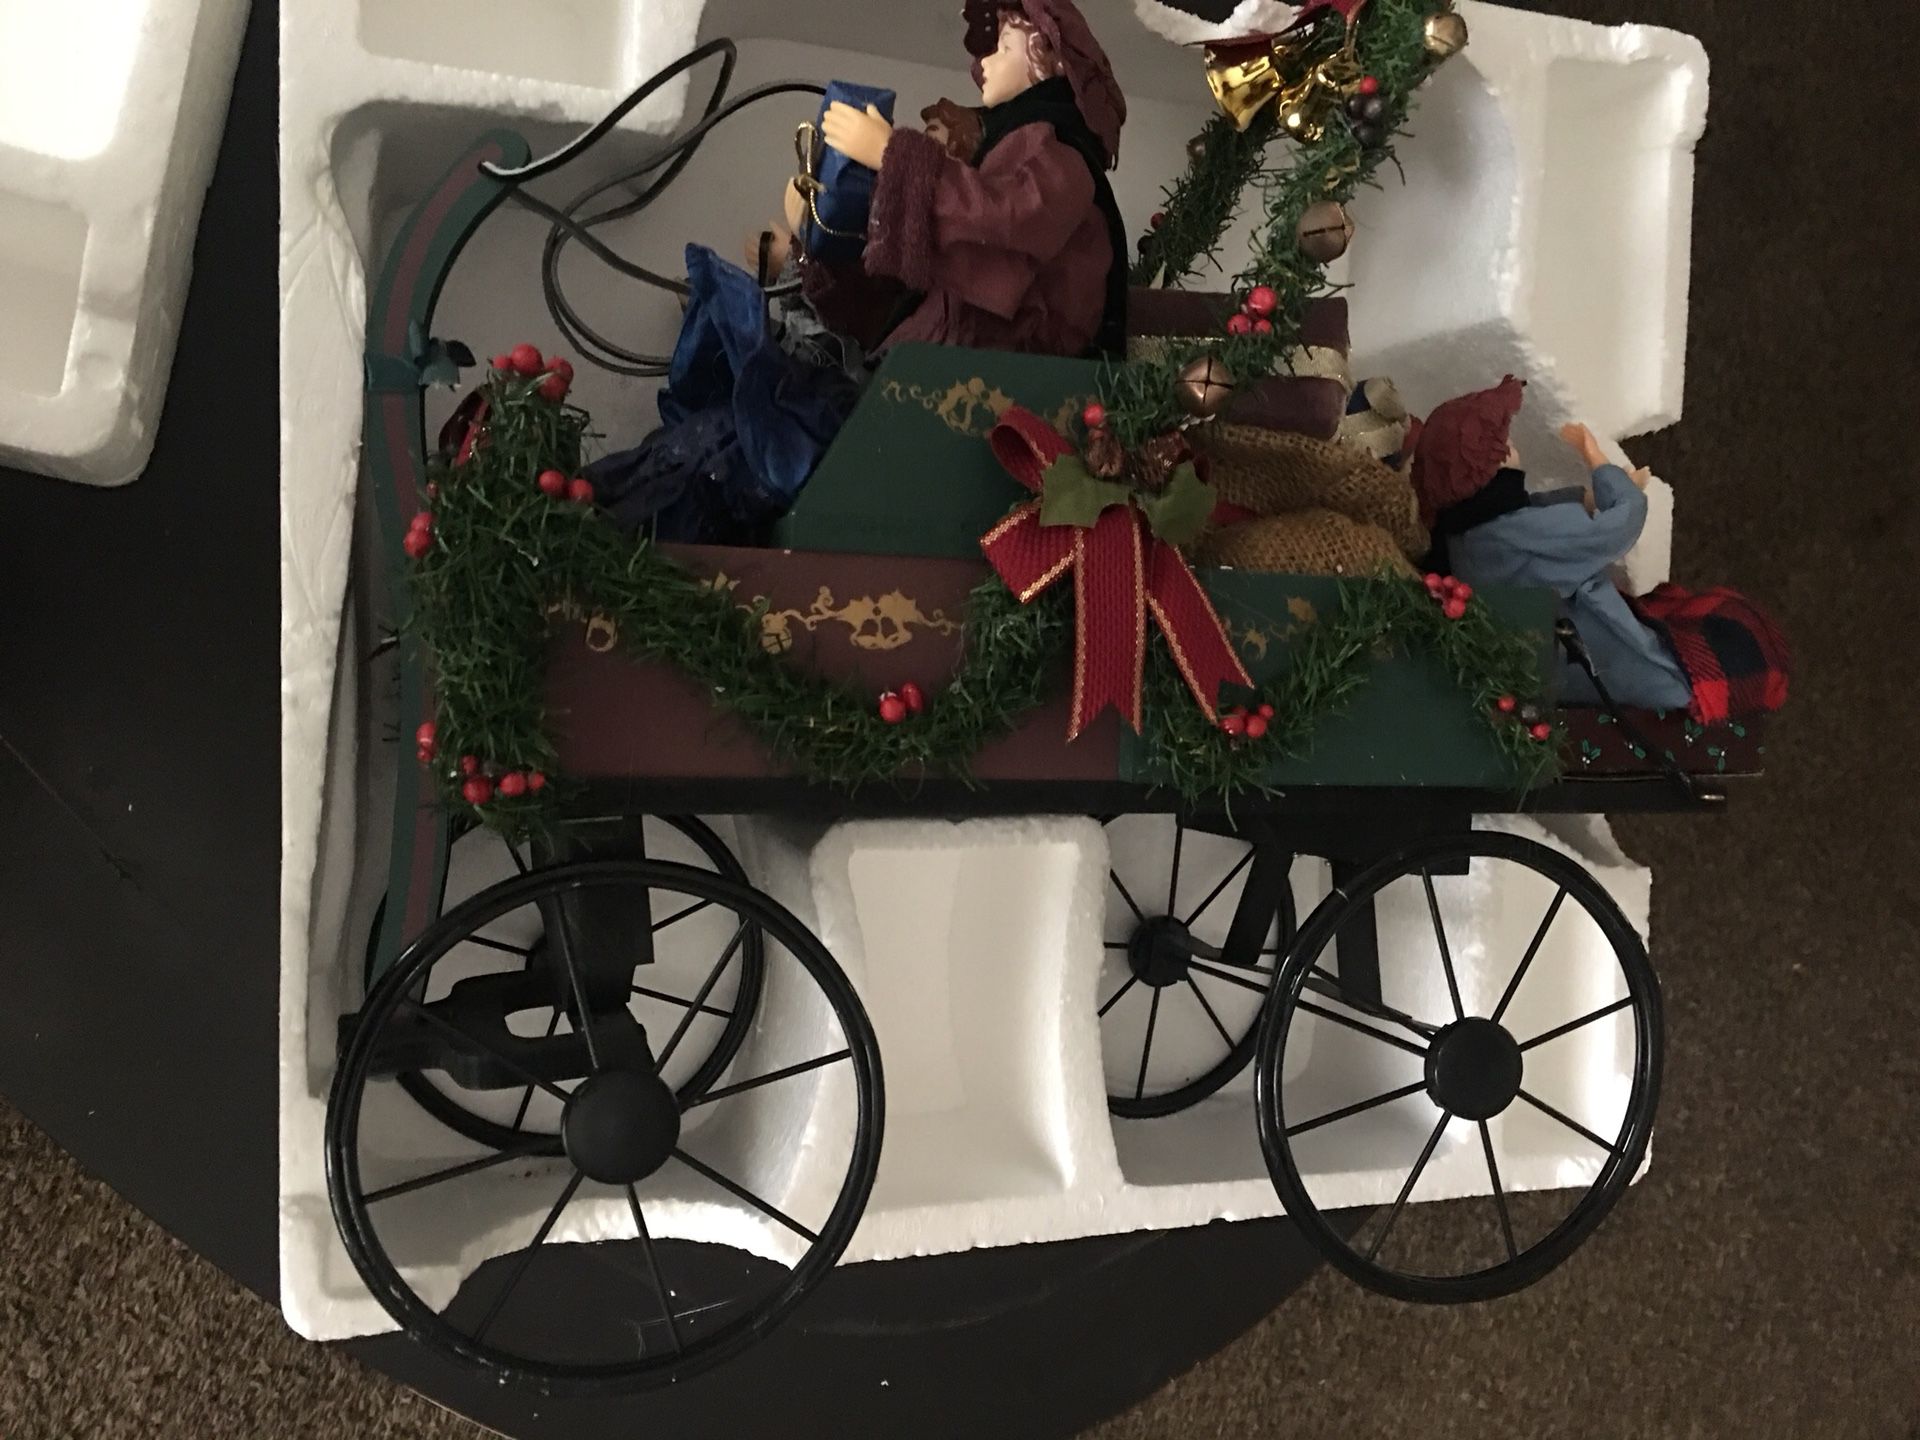 Traditions hand crafted & hand painted family in holiday carriage